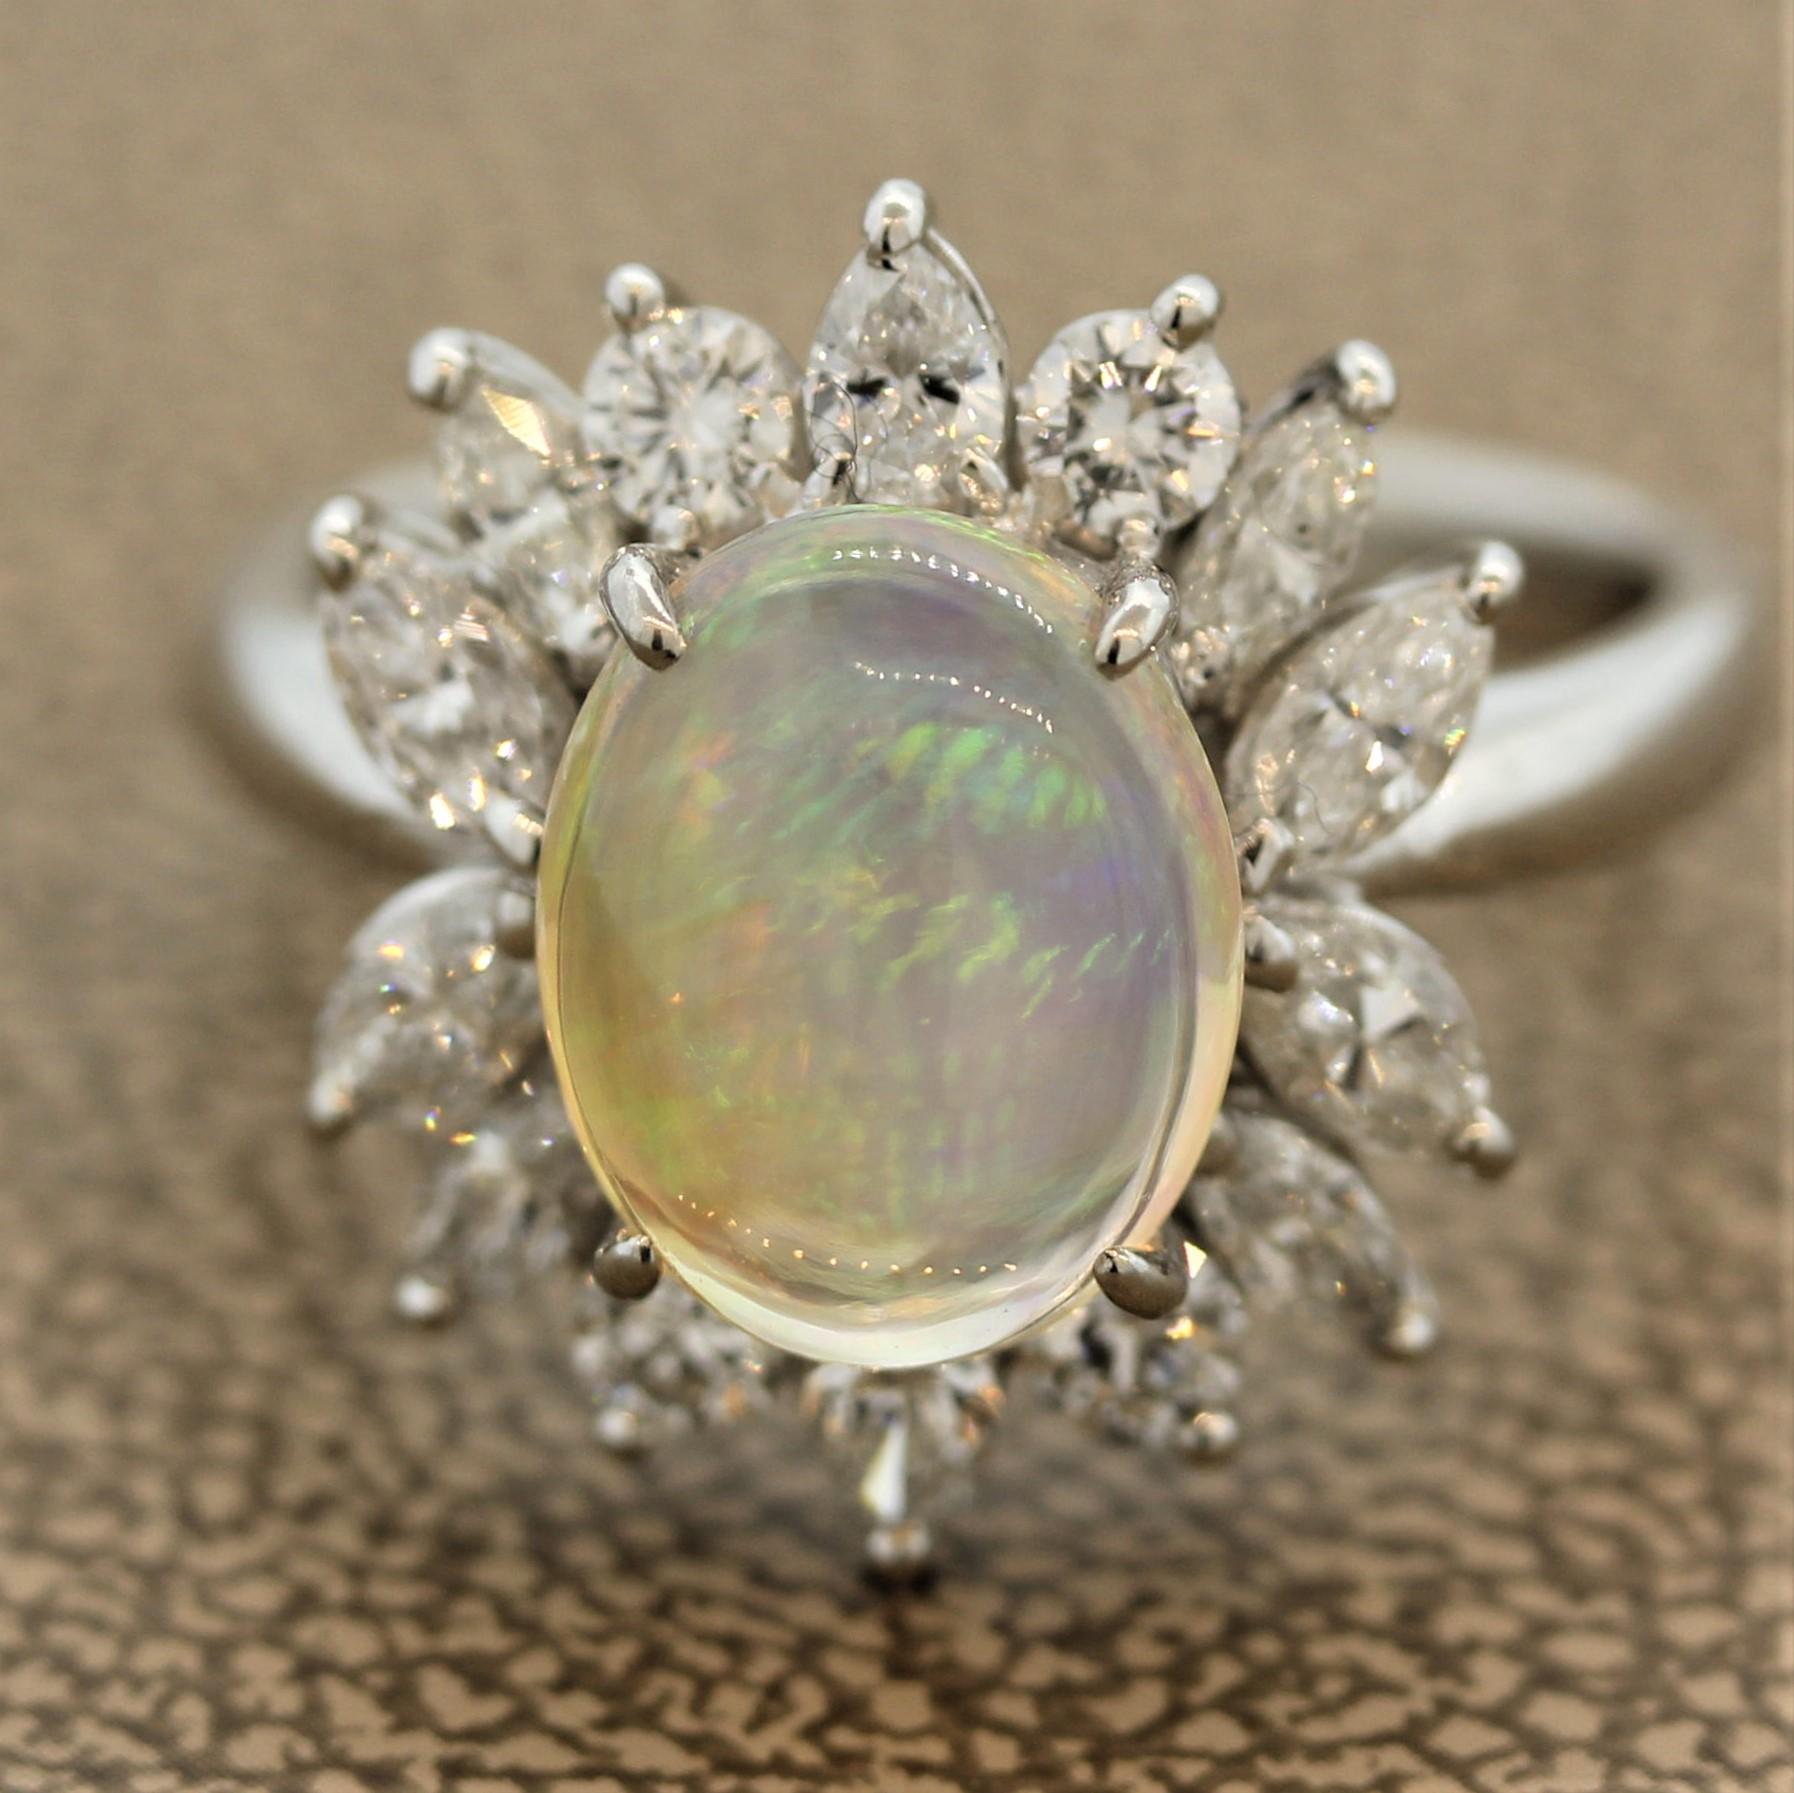 A ring featuring a bright crystal opal with amazing play-of-color. The 2.23 carat opal shows bright flashes of red, orange, green, yellow, and blue; which all roll and shine across the surface of the opal. It is surrounded by 1.12 carats of marquise